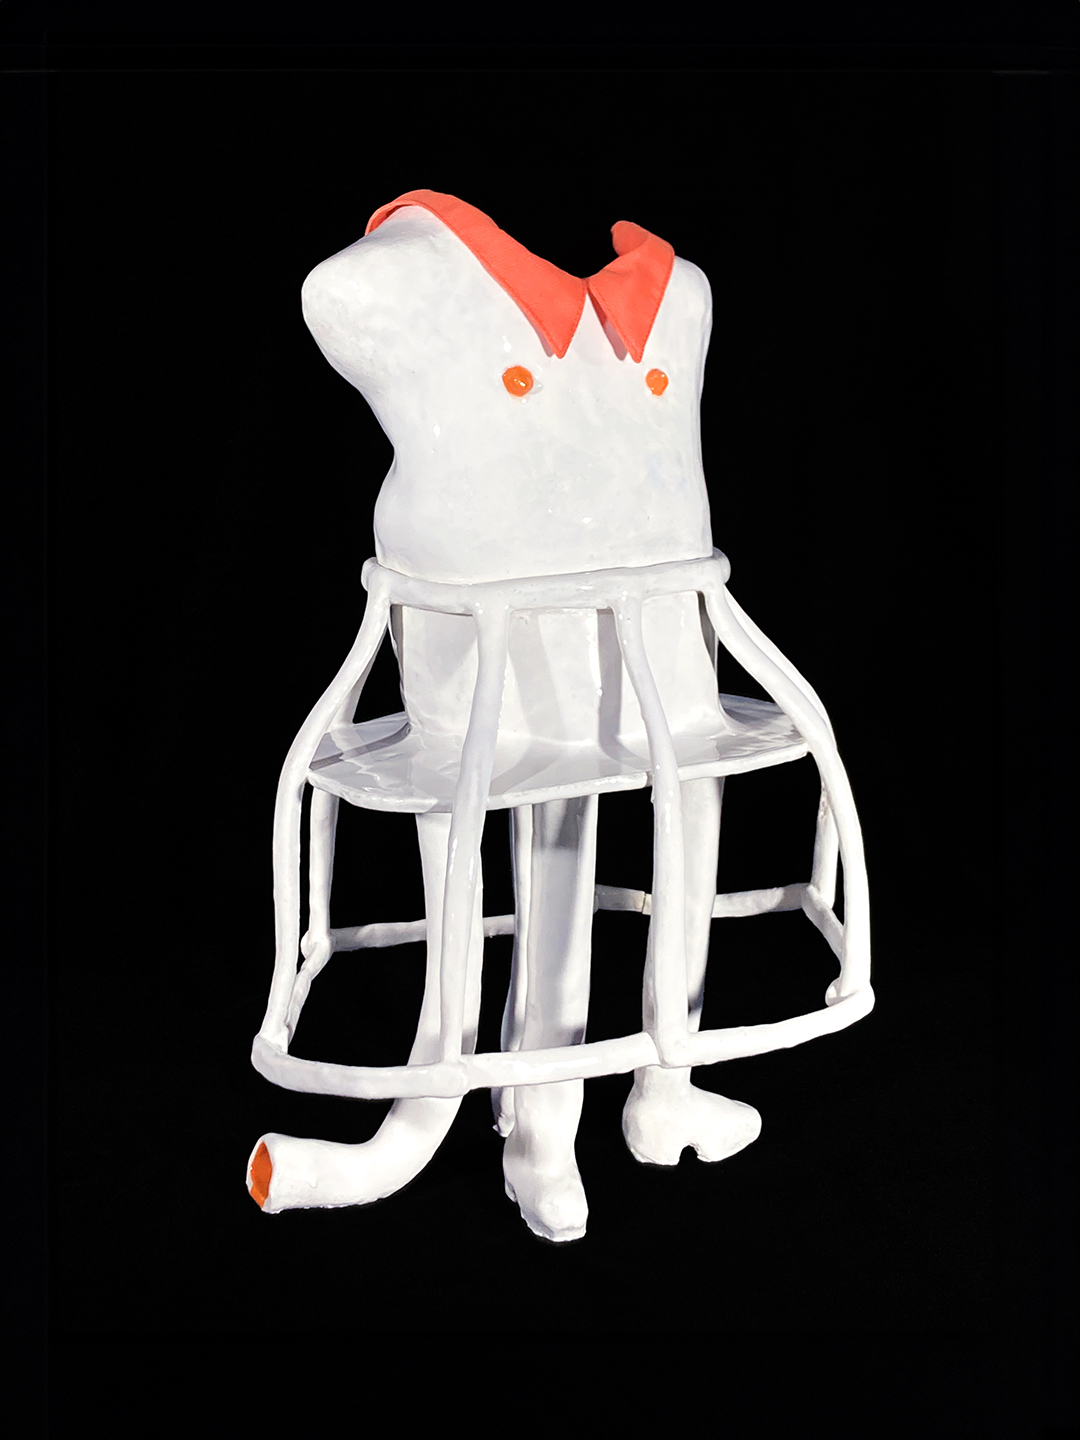 A white and orange plastic mannequin

Description automatically generated